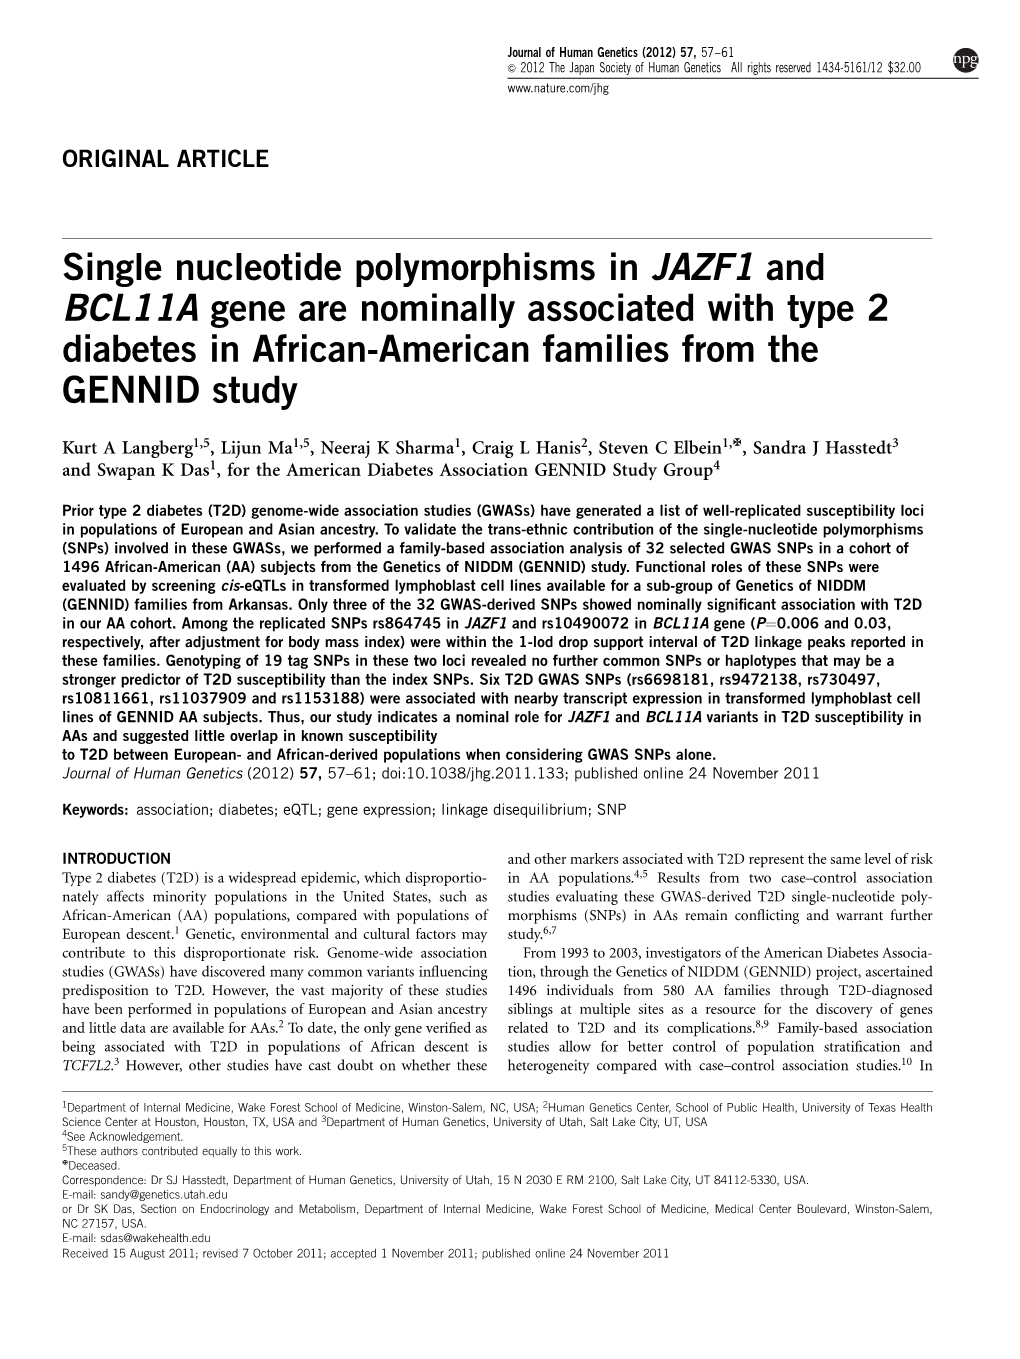 Single Nucleotide Polymorphisms in JAZF1 and BCL11A Gene Are Nominally Associated with Type 2 Diabetes in African-American Families from the GENNID Study